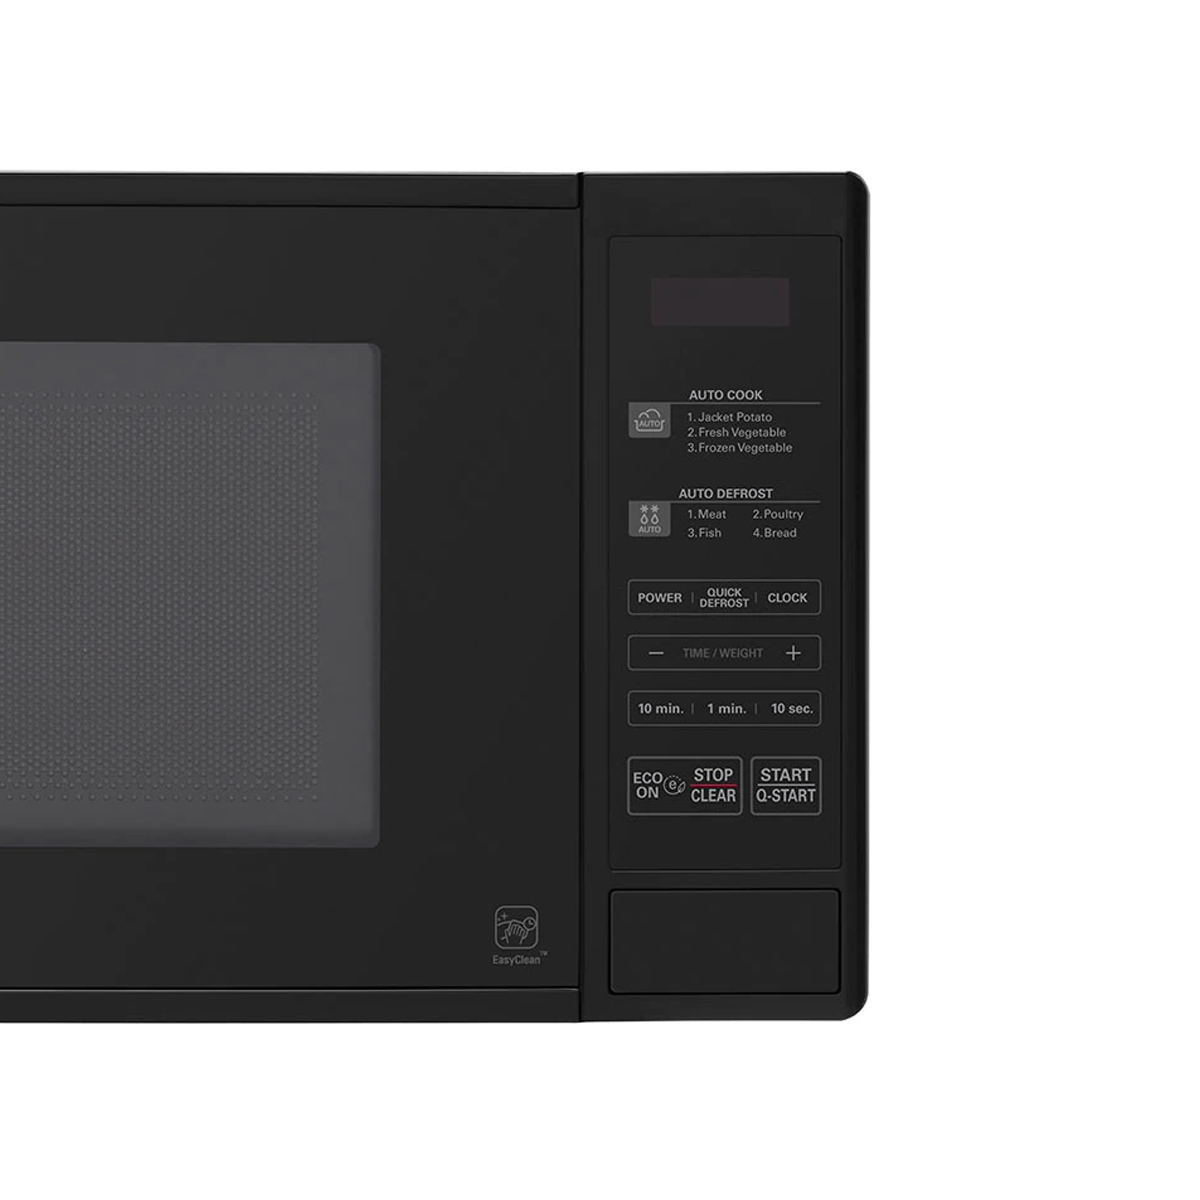 LG 20L Solo Microwave Oven